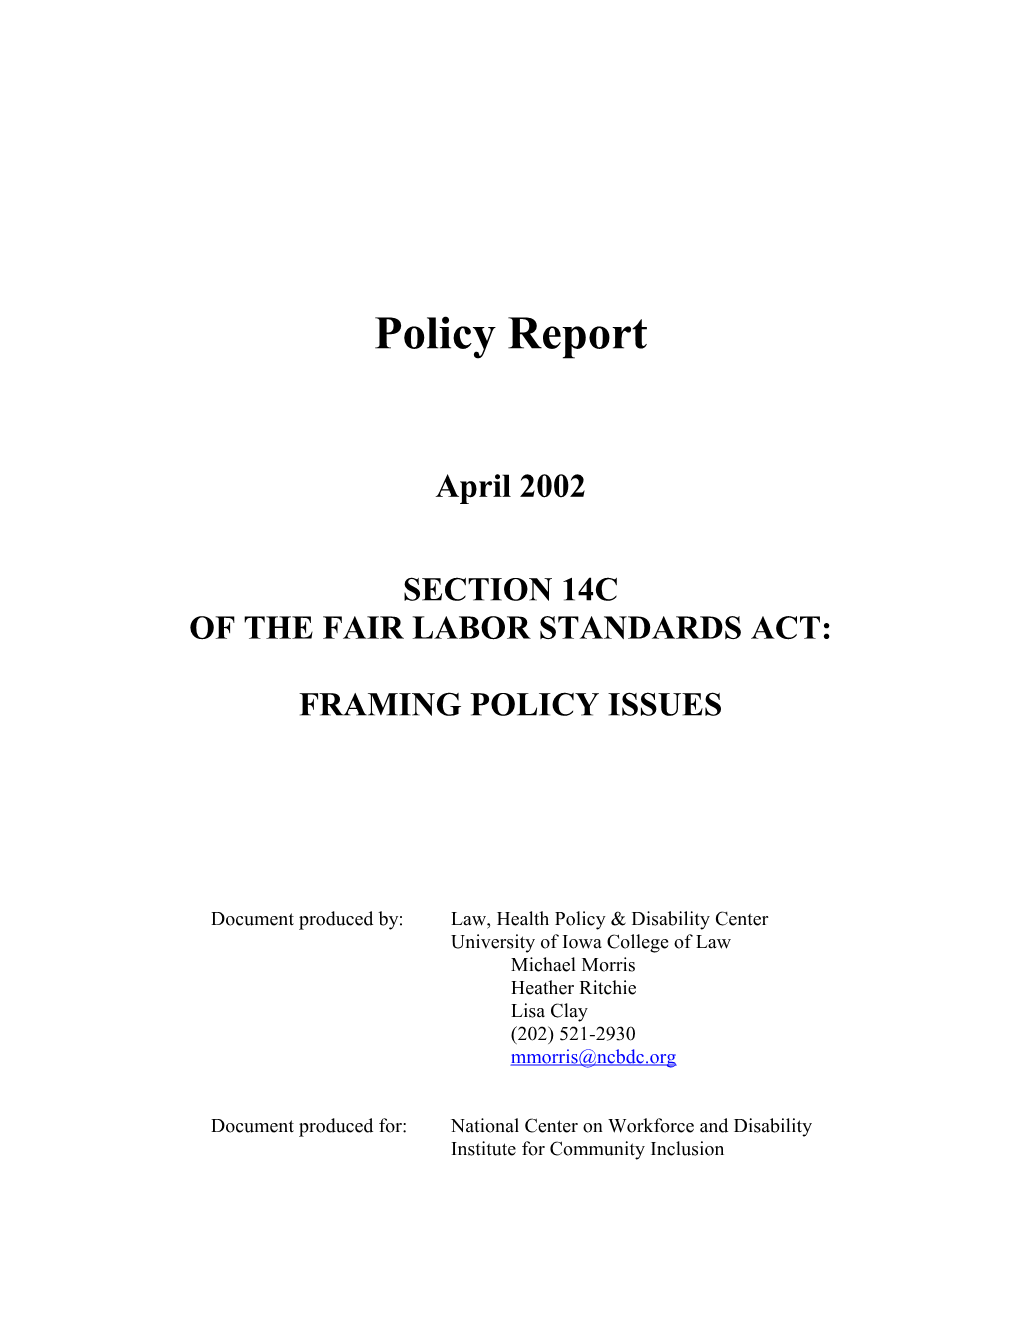 Of the Fair Labor Standards Act